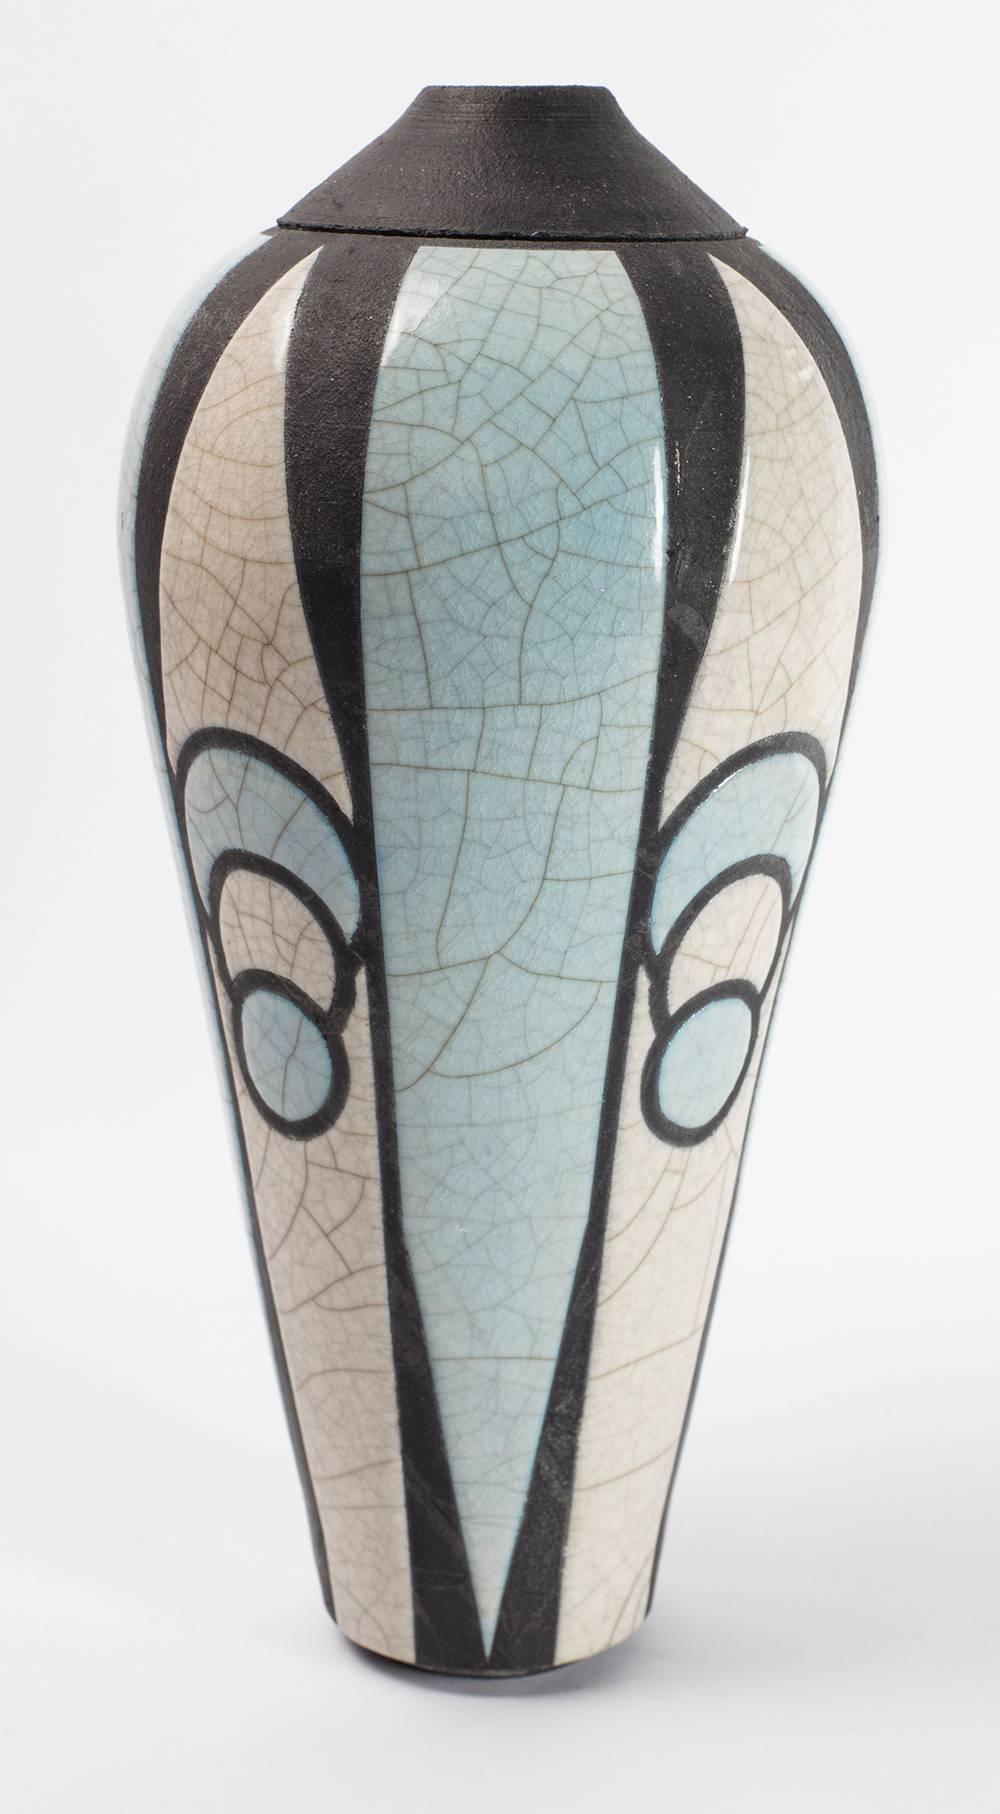 Dynamic American Raku pottery enameled glaze pottery vase in geometric high relief, two-tone blue, grey, white and black Signed on base. Measures: 12” high x 5” diameter.
 